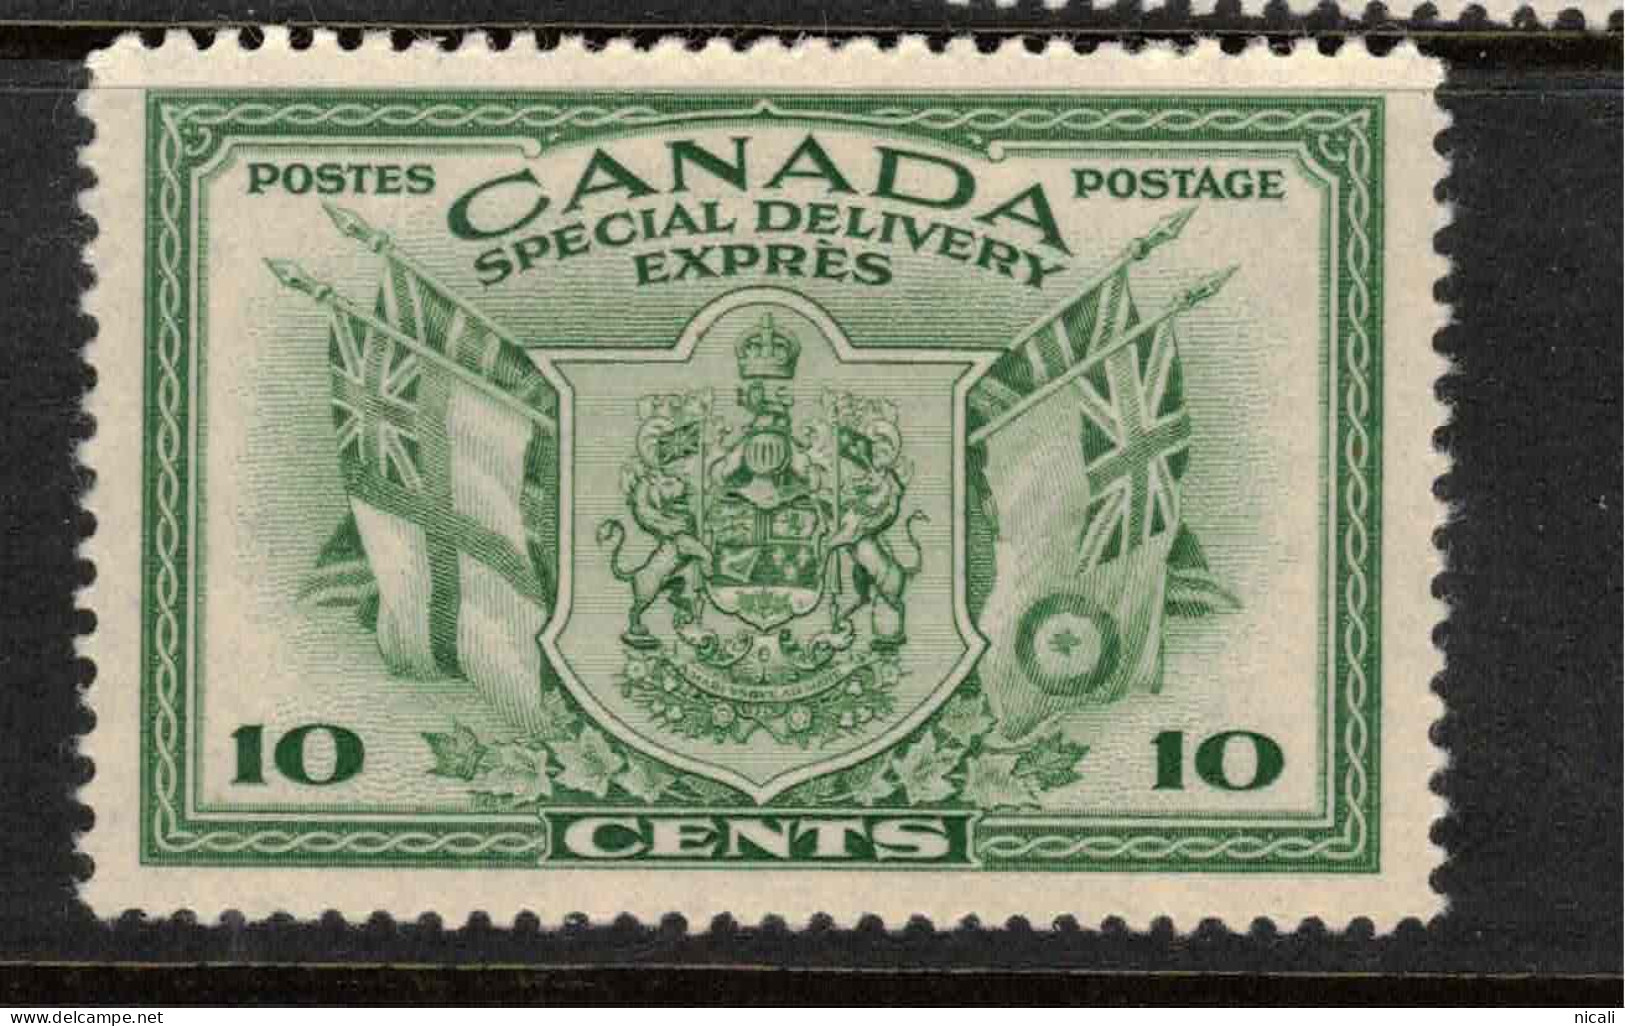 CANADA 1942 10c Special Delivery SG S12 HM ZZ82 - Luftpost-Express